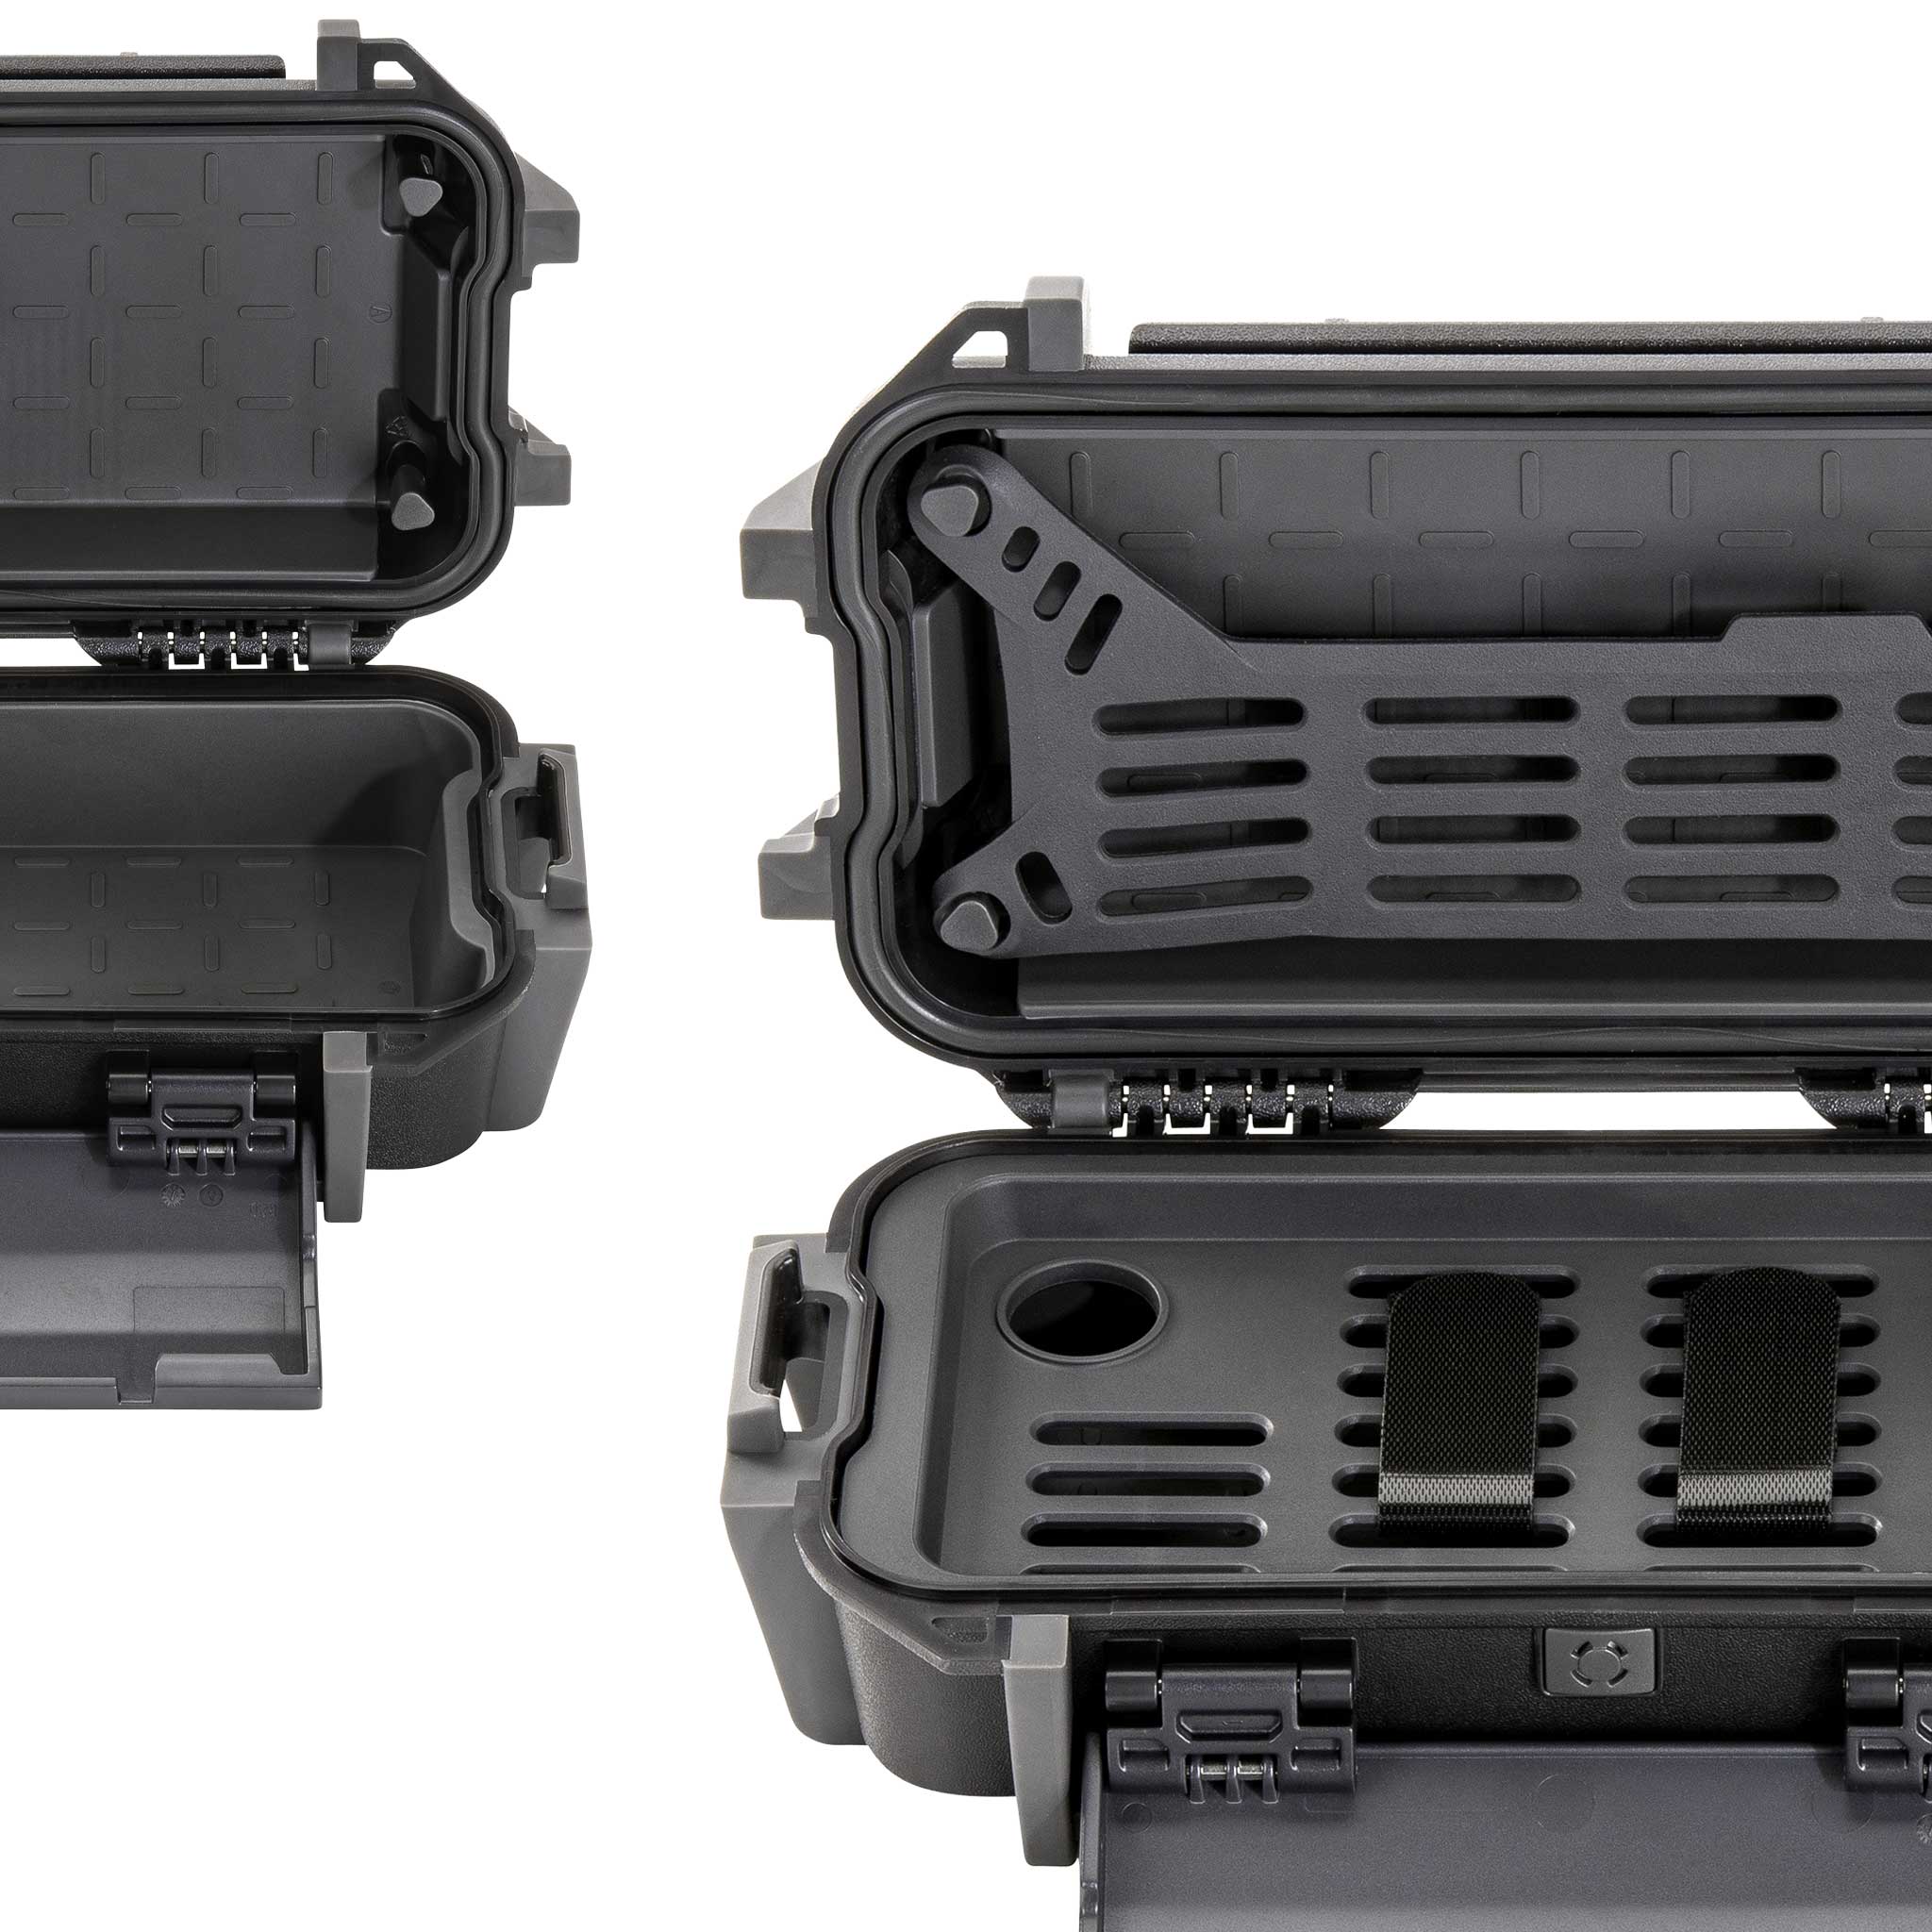 1 piece new cubed foam insert fits your Pelican Ruck 20 R20 case